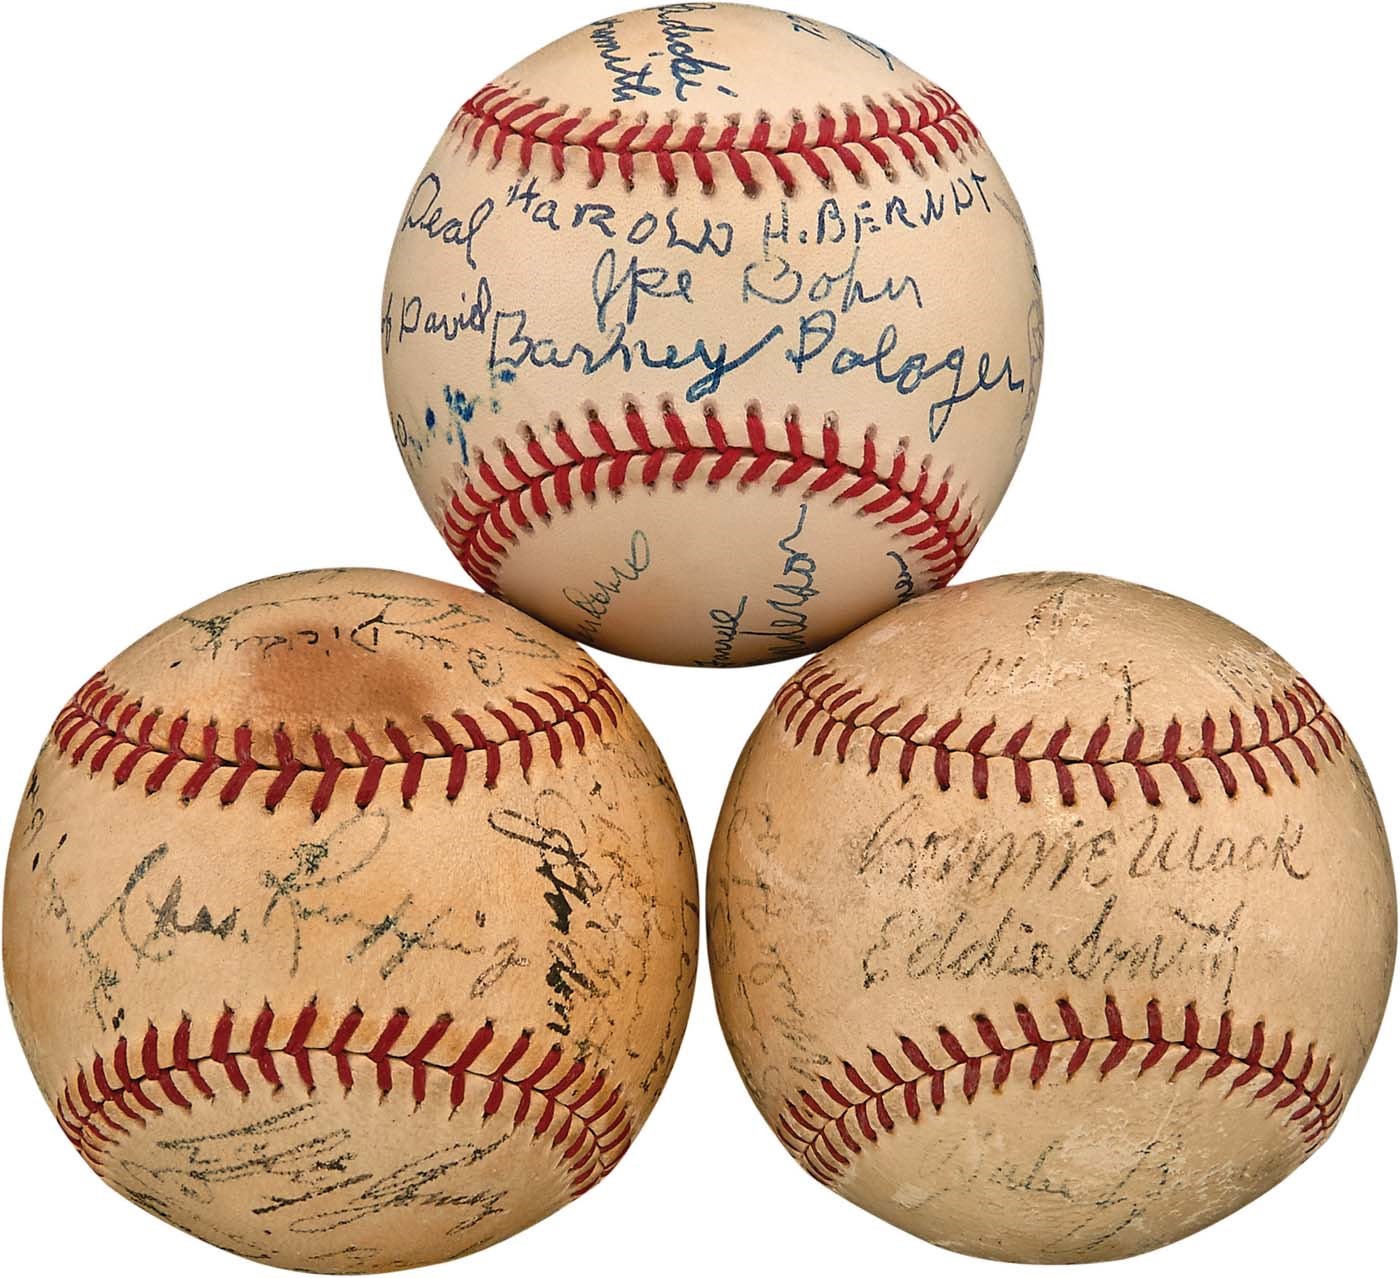 Baseball Autographs - Unique Signed Baseballs with 1941 Yankees & Connie Mack (3)